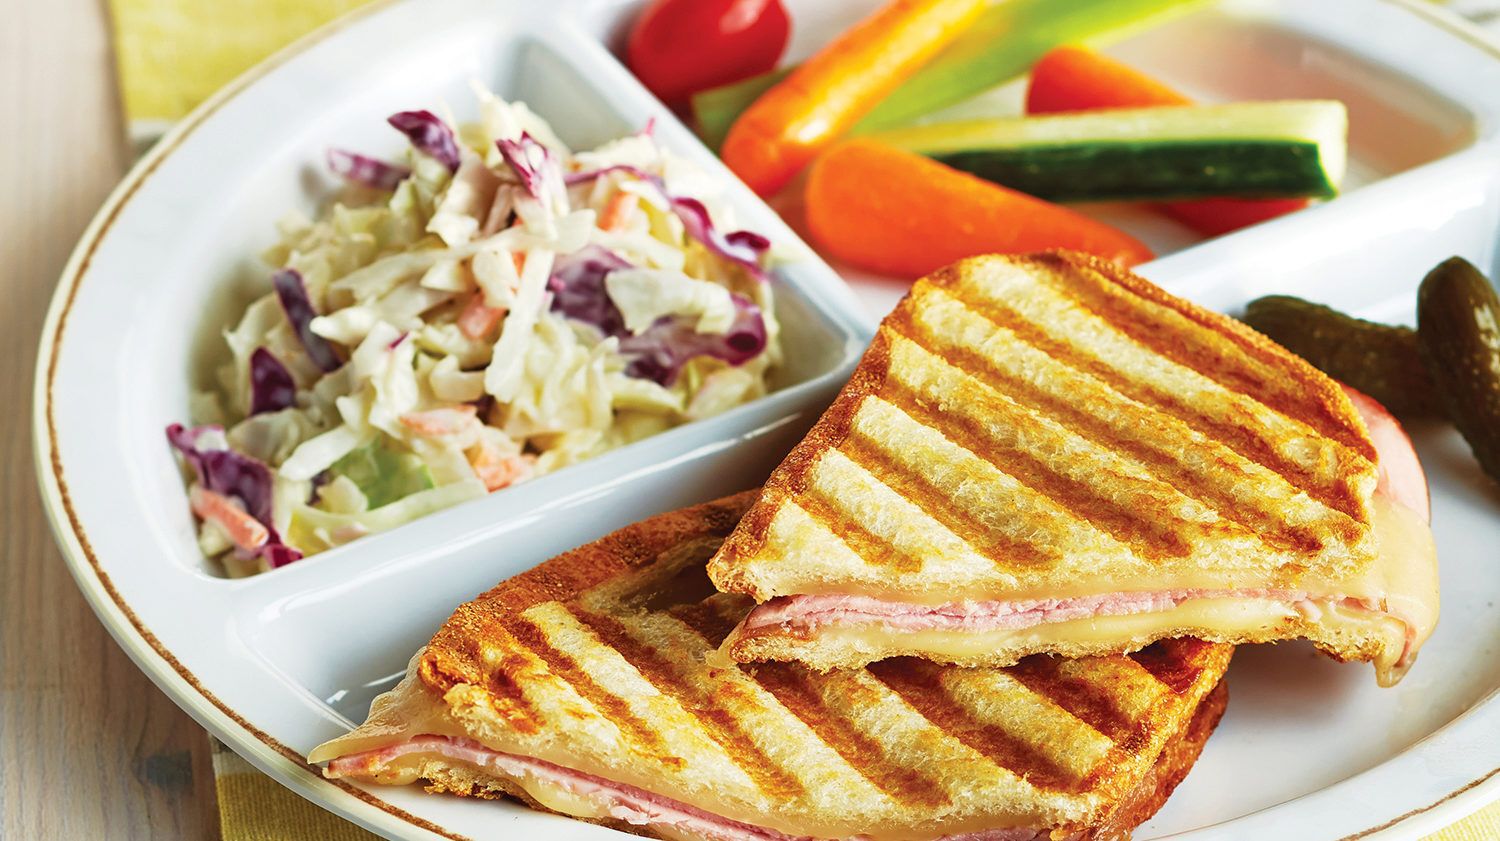 Read more about Ham & Cheese Melt